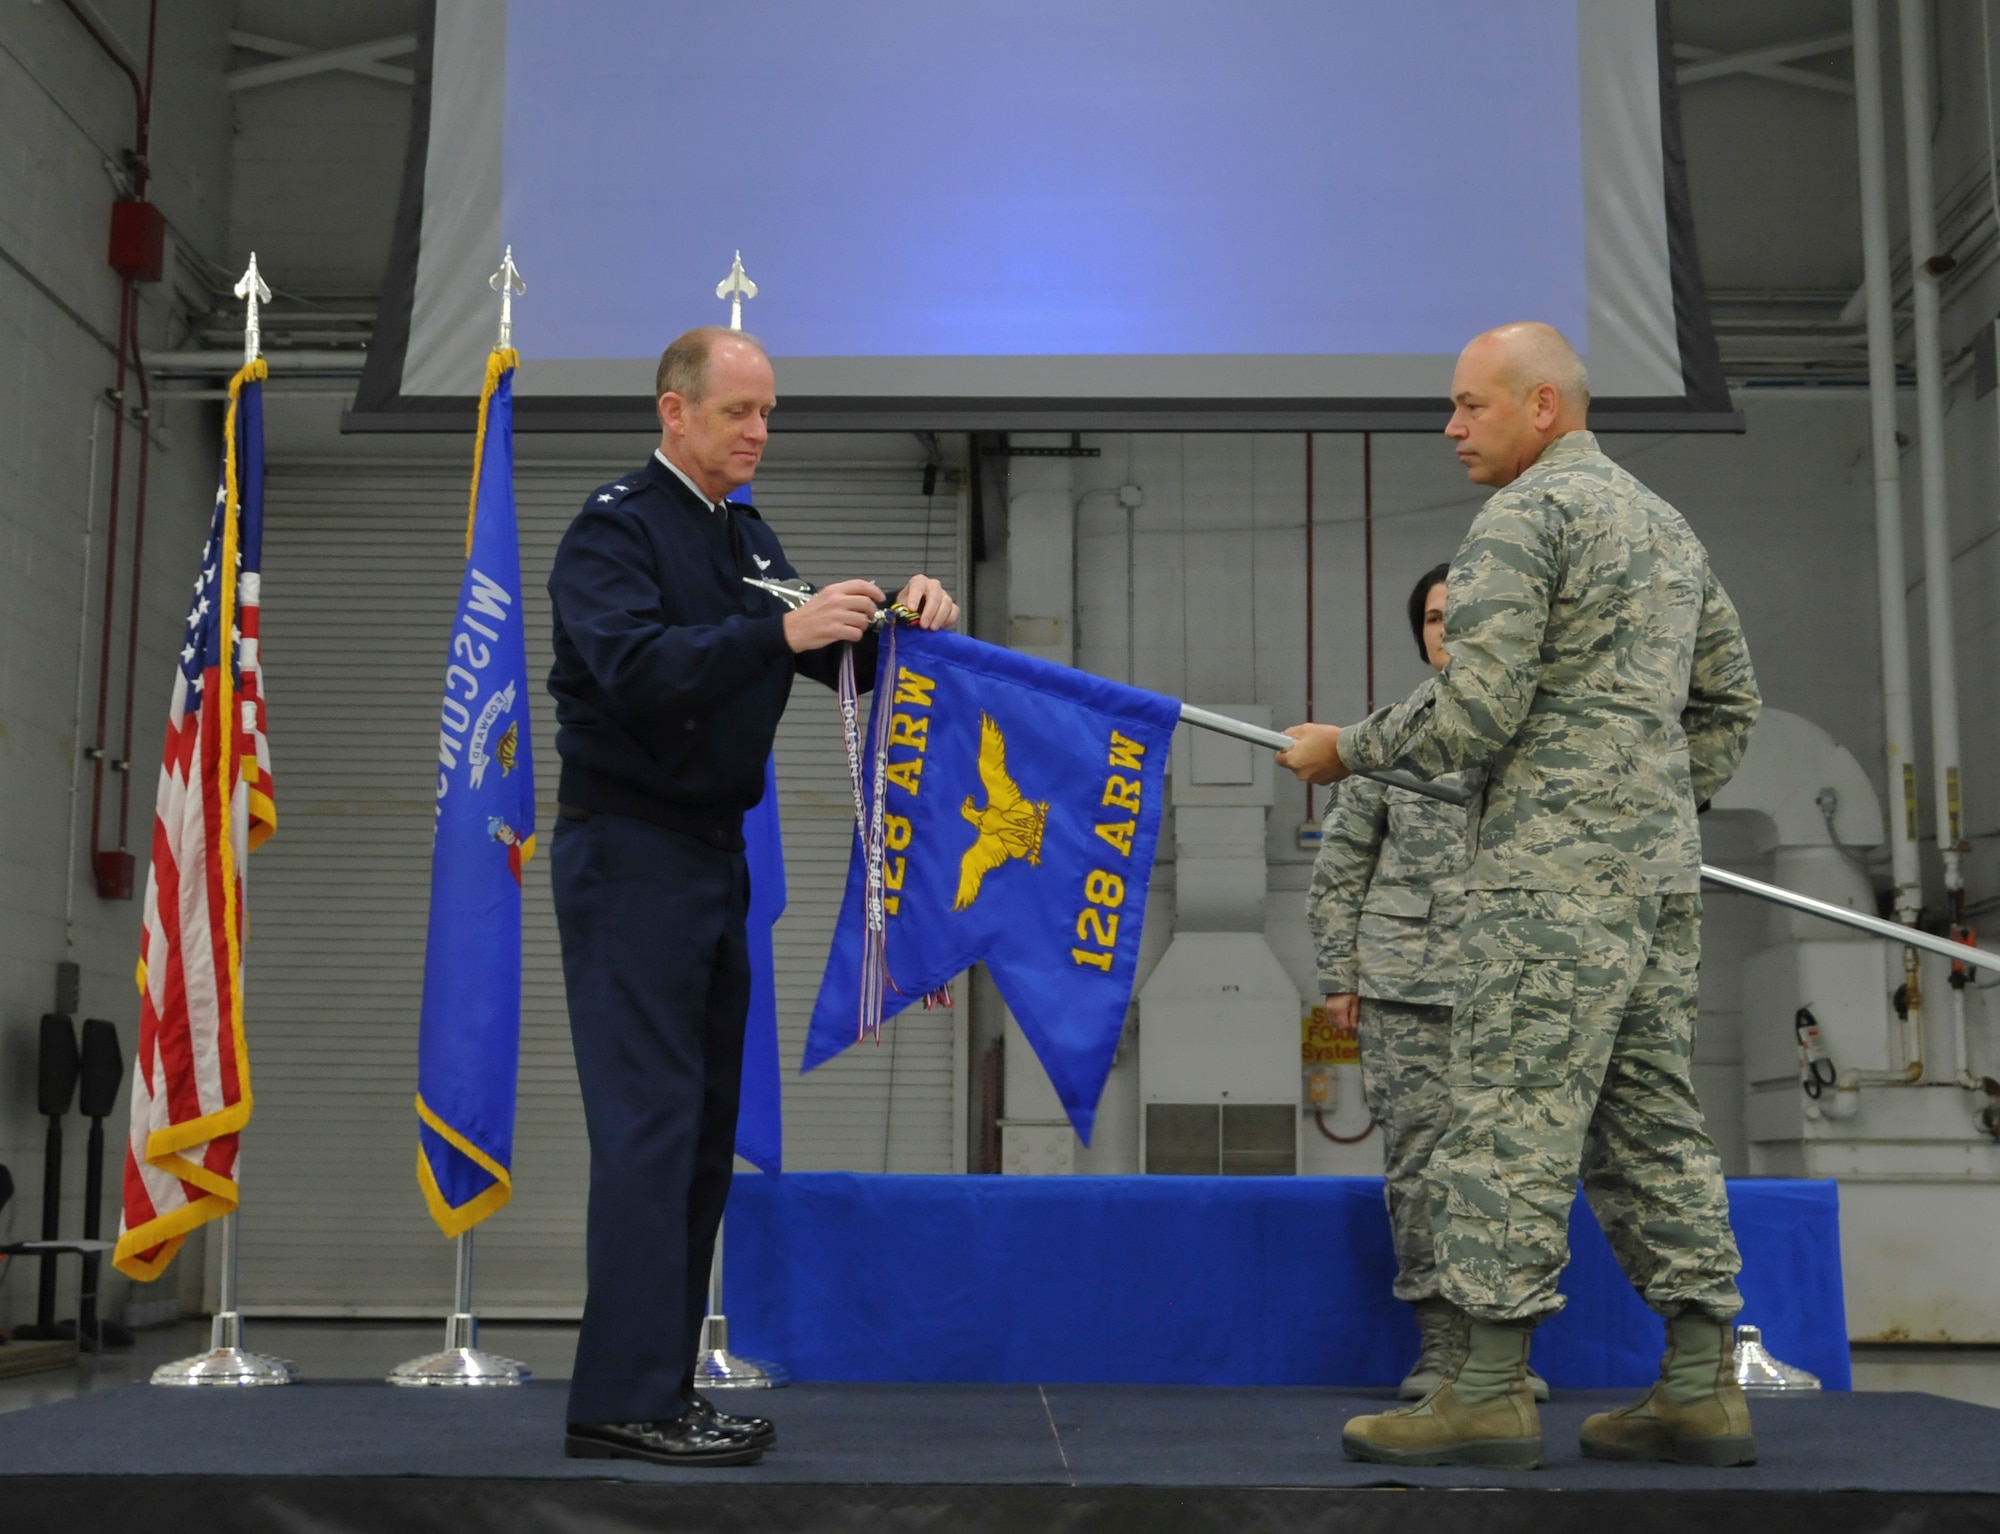 Major General Donald P. Dunbar, Adjutant General of the Wisconsin National Guard, presents the Air Force Outstanding Unit Award to Col. Daniel Yenchesky, commander of the 128th Air Refueling Wing in a formal ceremony Oct. 2, 2016 at General Mitchell Airfield, Milwaukee. This award marks the seventh time the 128 ARW has received the AFOUA and covers the period of Oct. 1, 2014 through Sept. 30, 2015. (Air National Guard photo by Senior Airman Morgan R. Lipinski, 128 ARW Public Affairs/Released) 